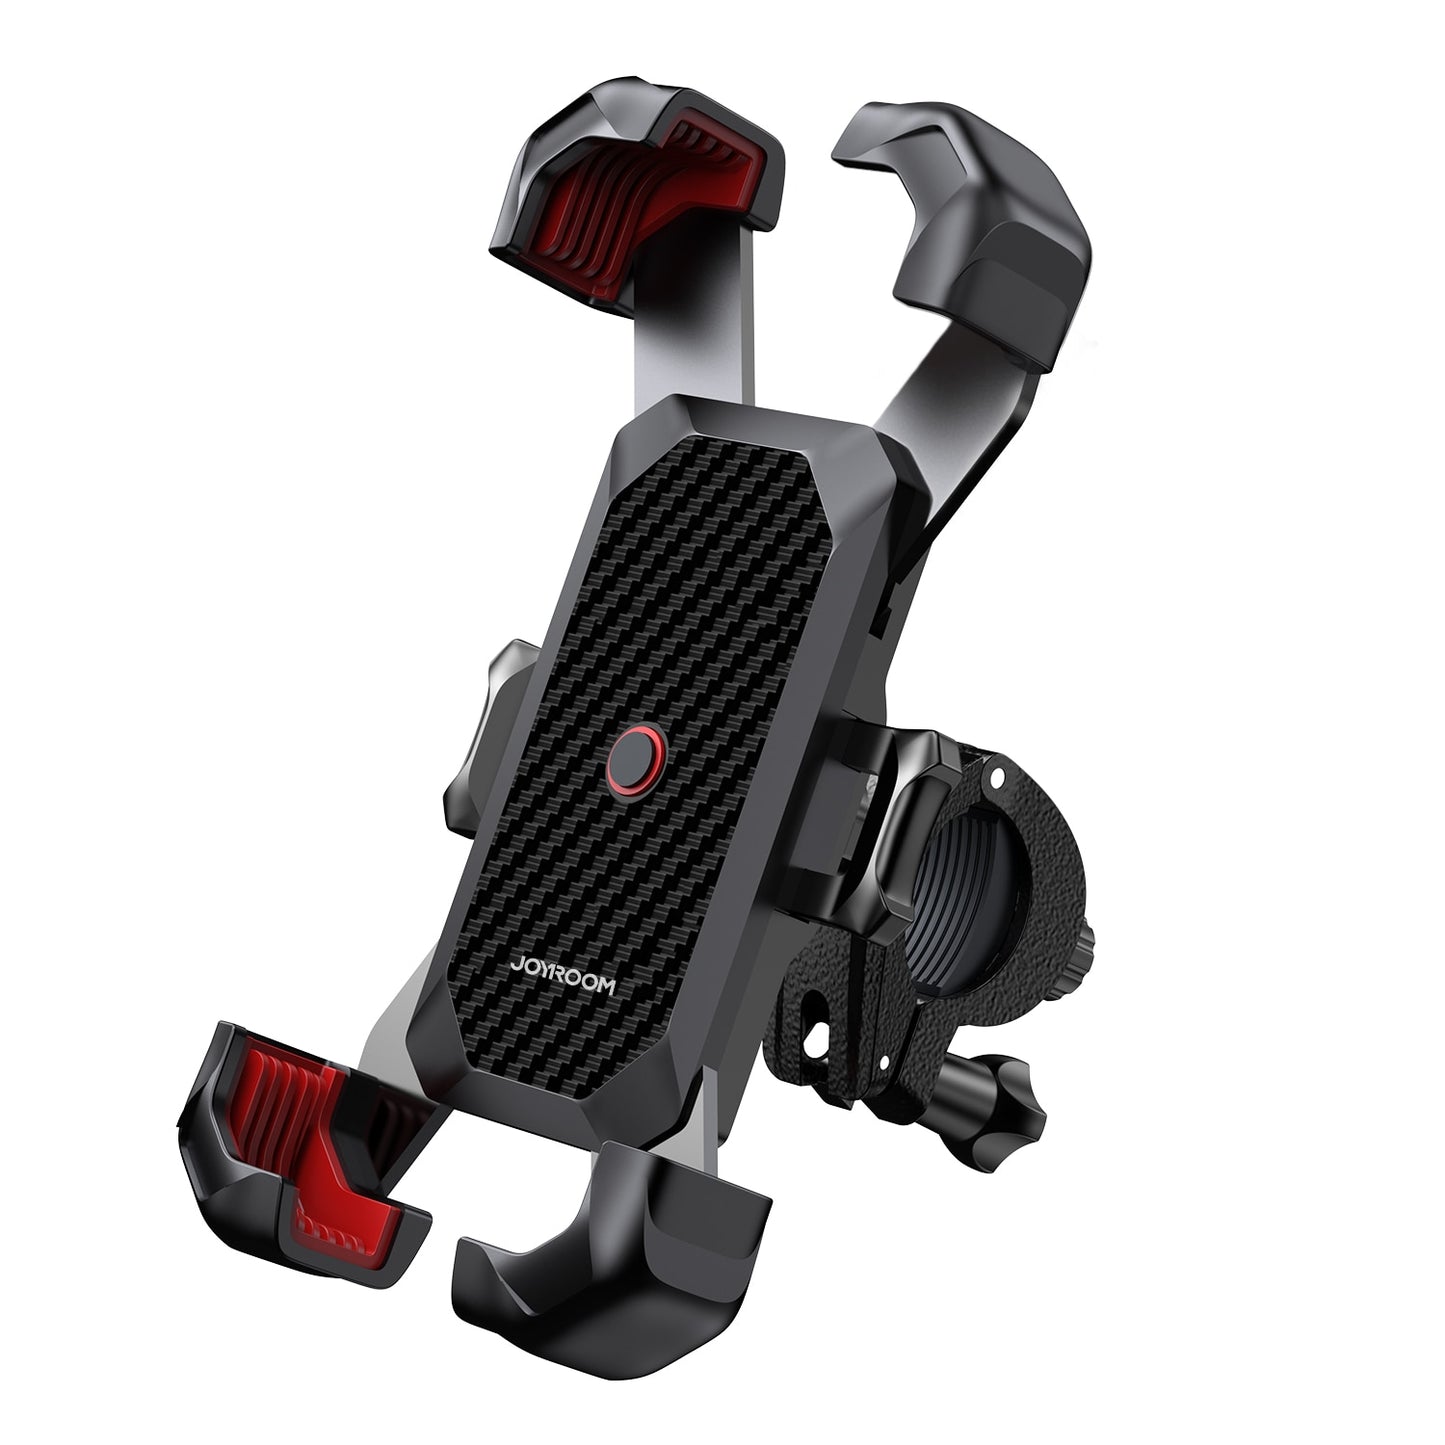 Bicycle Phone Holder 360° View Universal